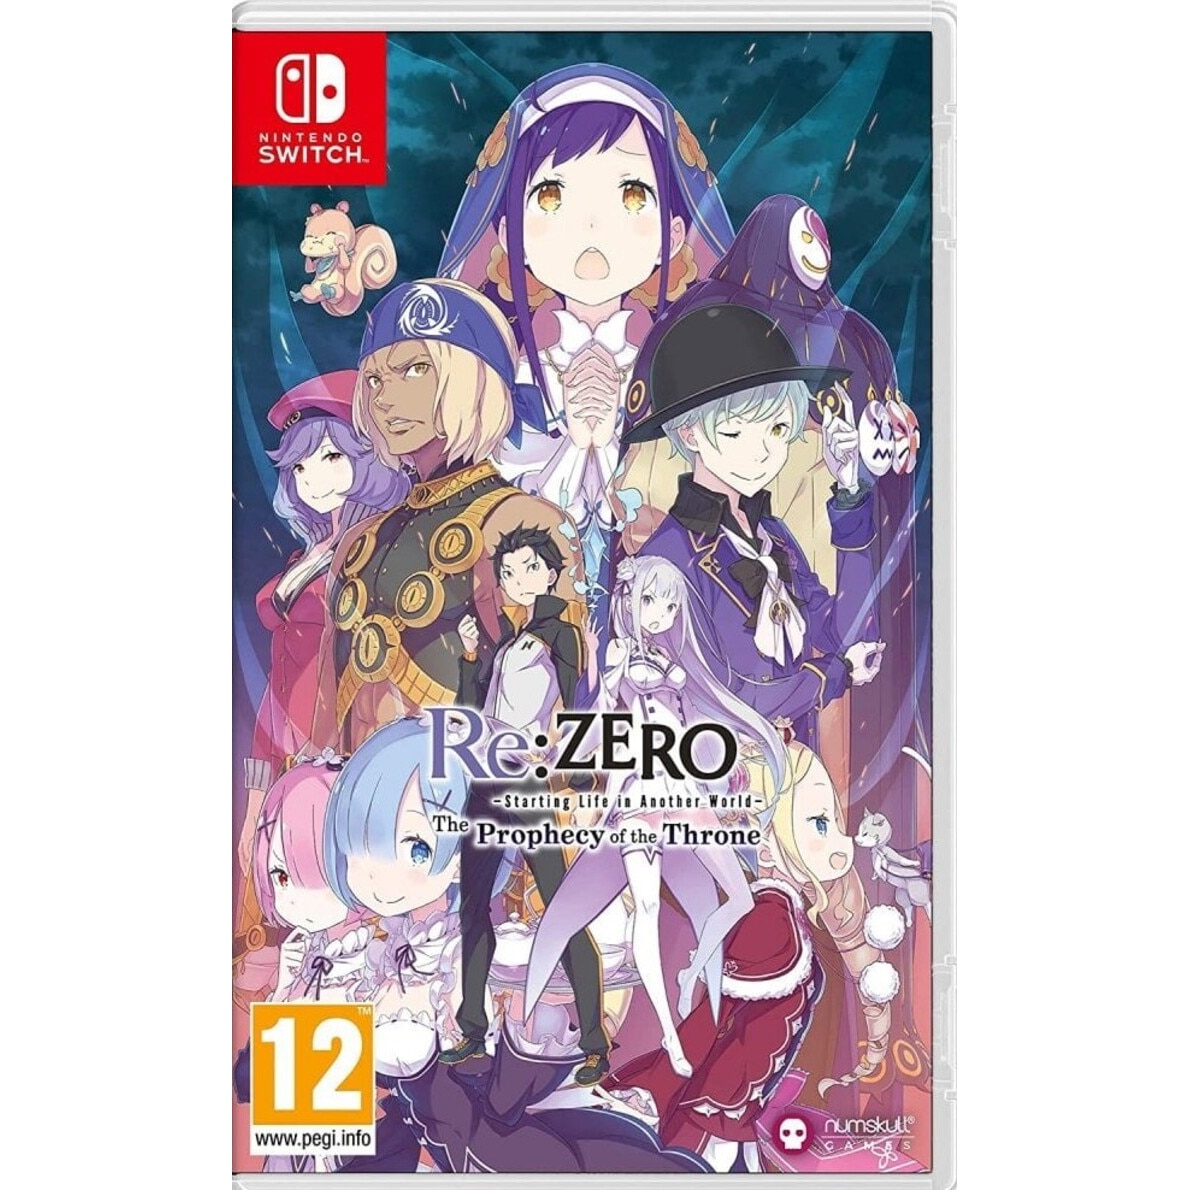 Re switched. Re:Zero: the Prophecy of the Throne. Re:Zero -starting Life in another World- the Prophecy of the Throne. Re:Zero – starting Life in another World: the Prophecy of the Throne русификатор. Switch restart.